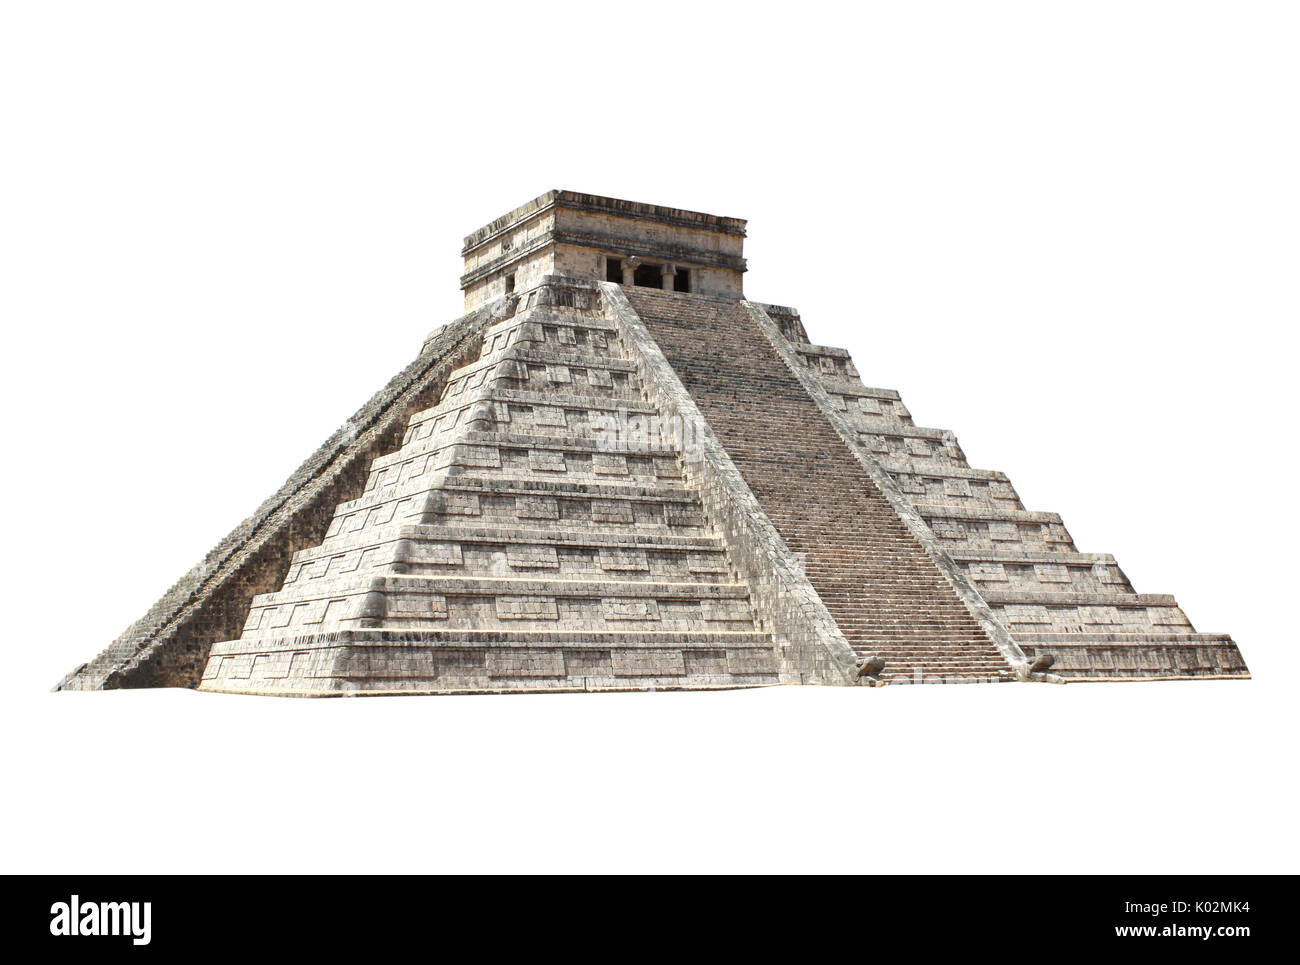 Ancient Mayan pyramid (Kukulcan Temple), Chichen Itza, Yucatan, Mexico. UNESCO world heritage site. Isolated on white background Stock Photo